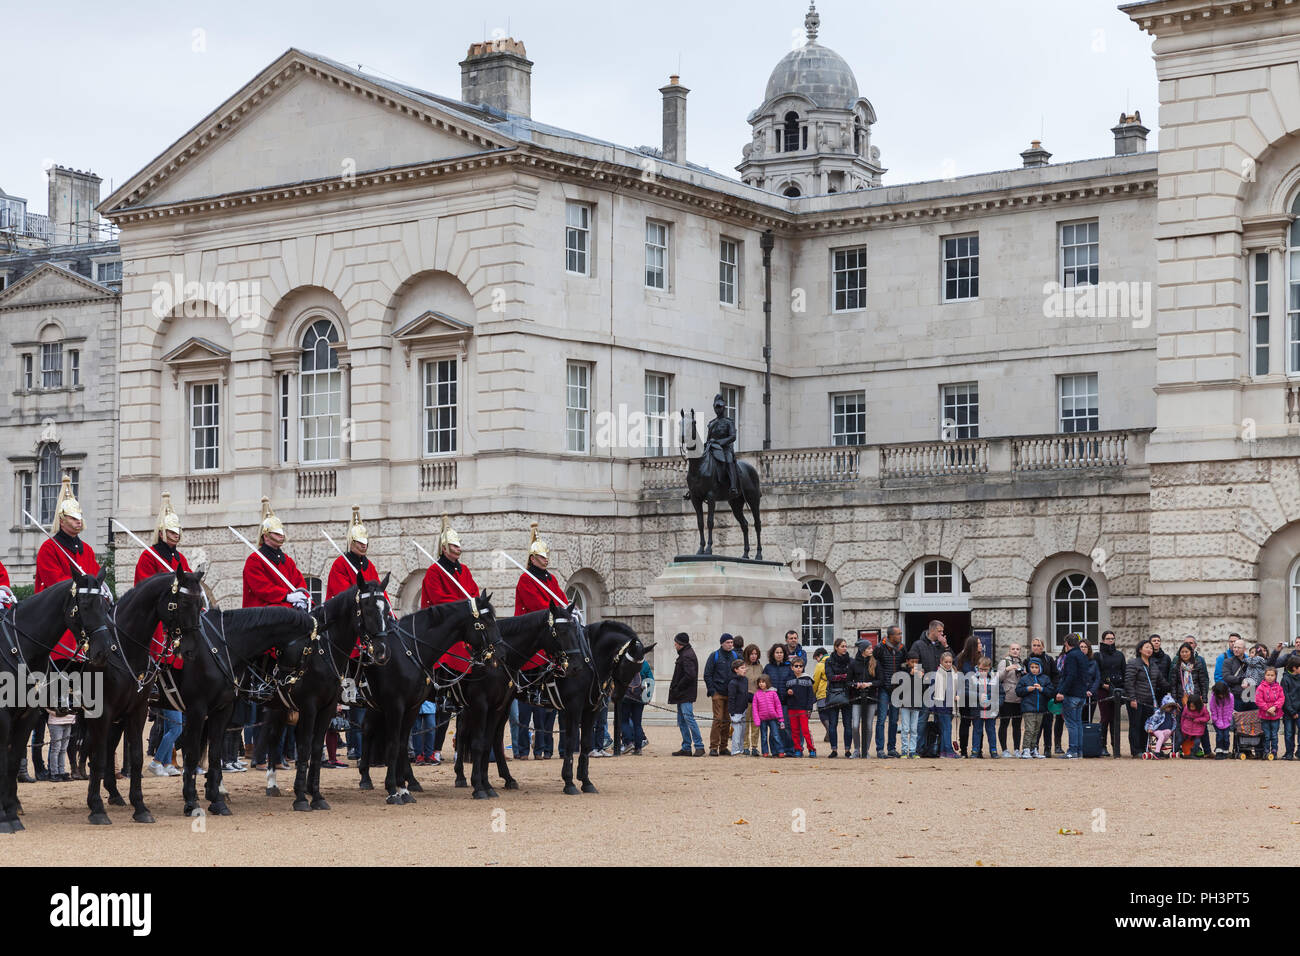 London, United Kingdom - October 29, 2017: Mounted guards and tourists near Horse Guards of Whitehall in London Stock Photo